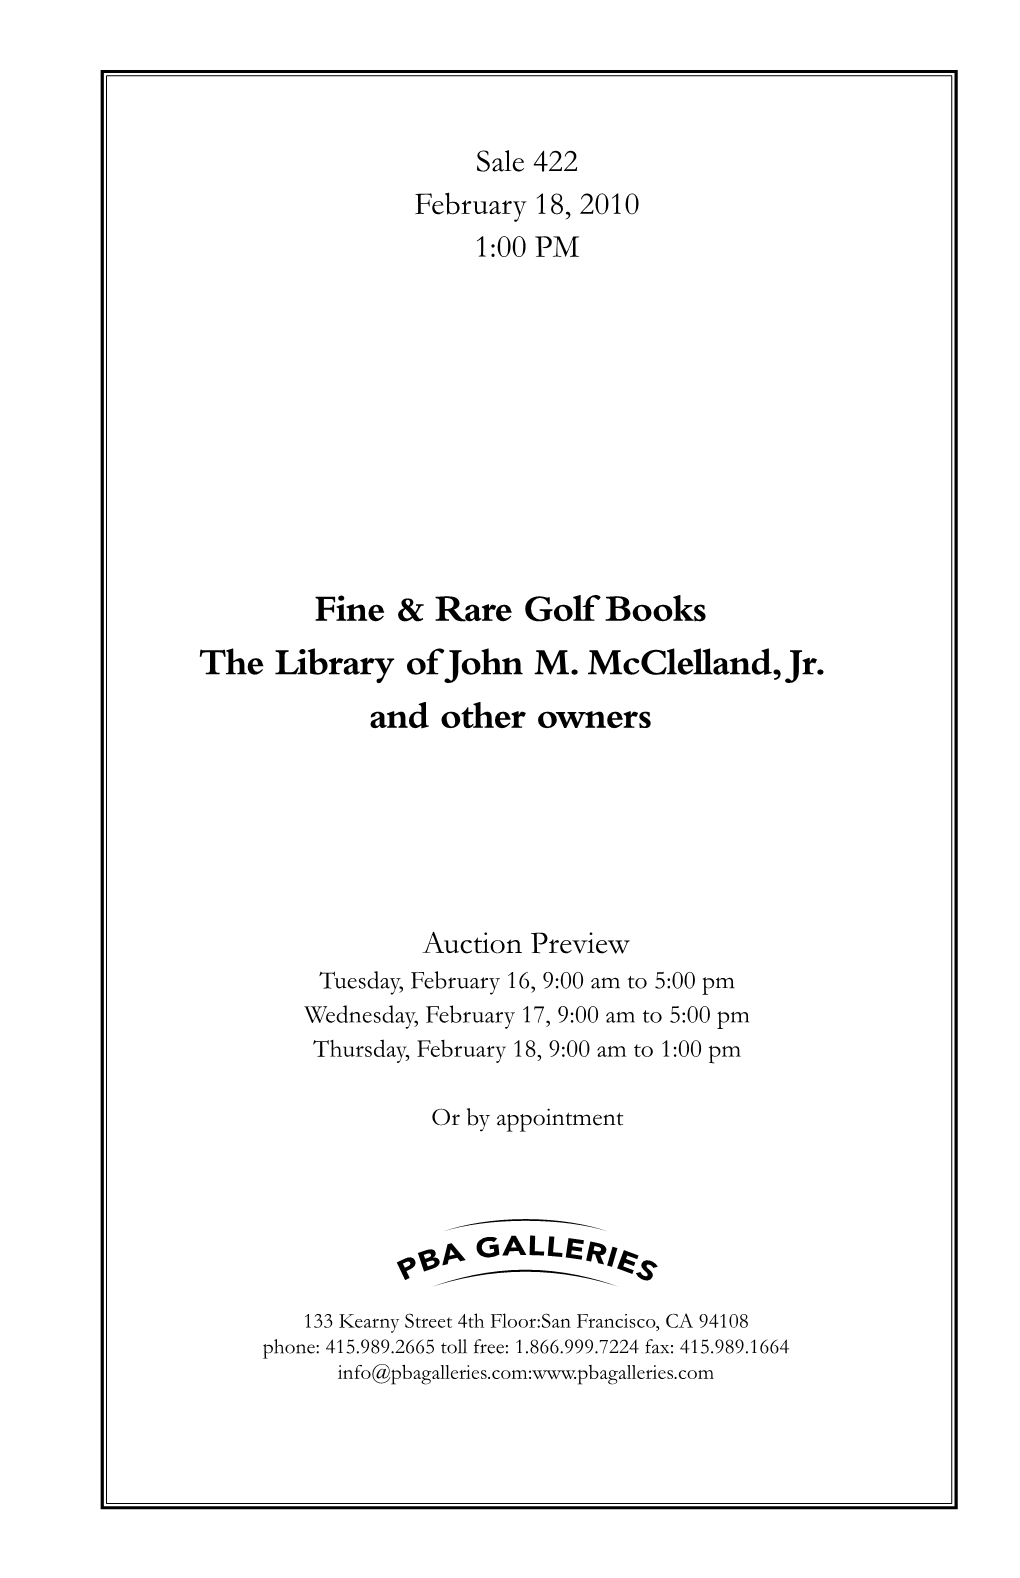 Fine & Rare Golf Books the Library of John M. Mcclelland, Jr. and Other